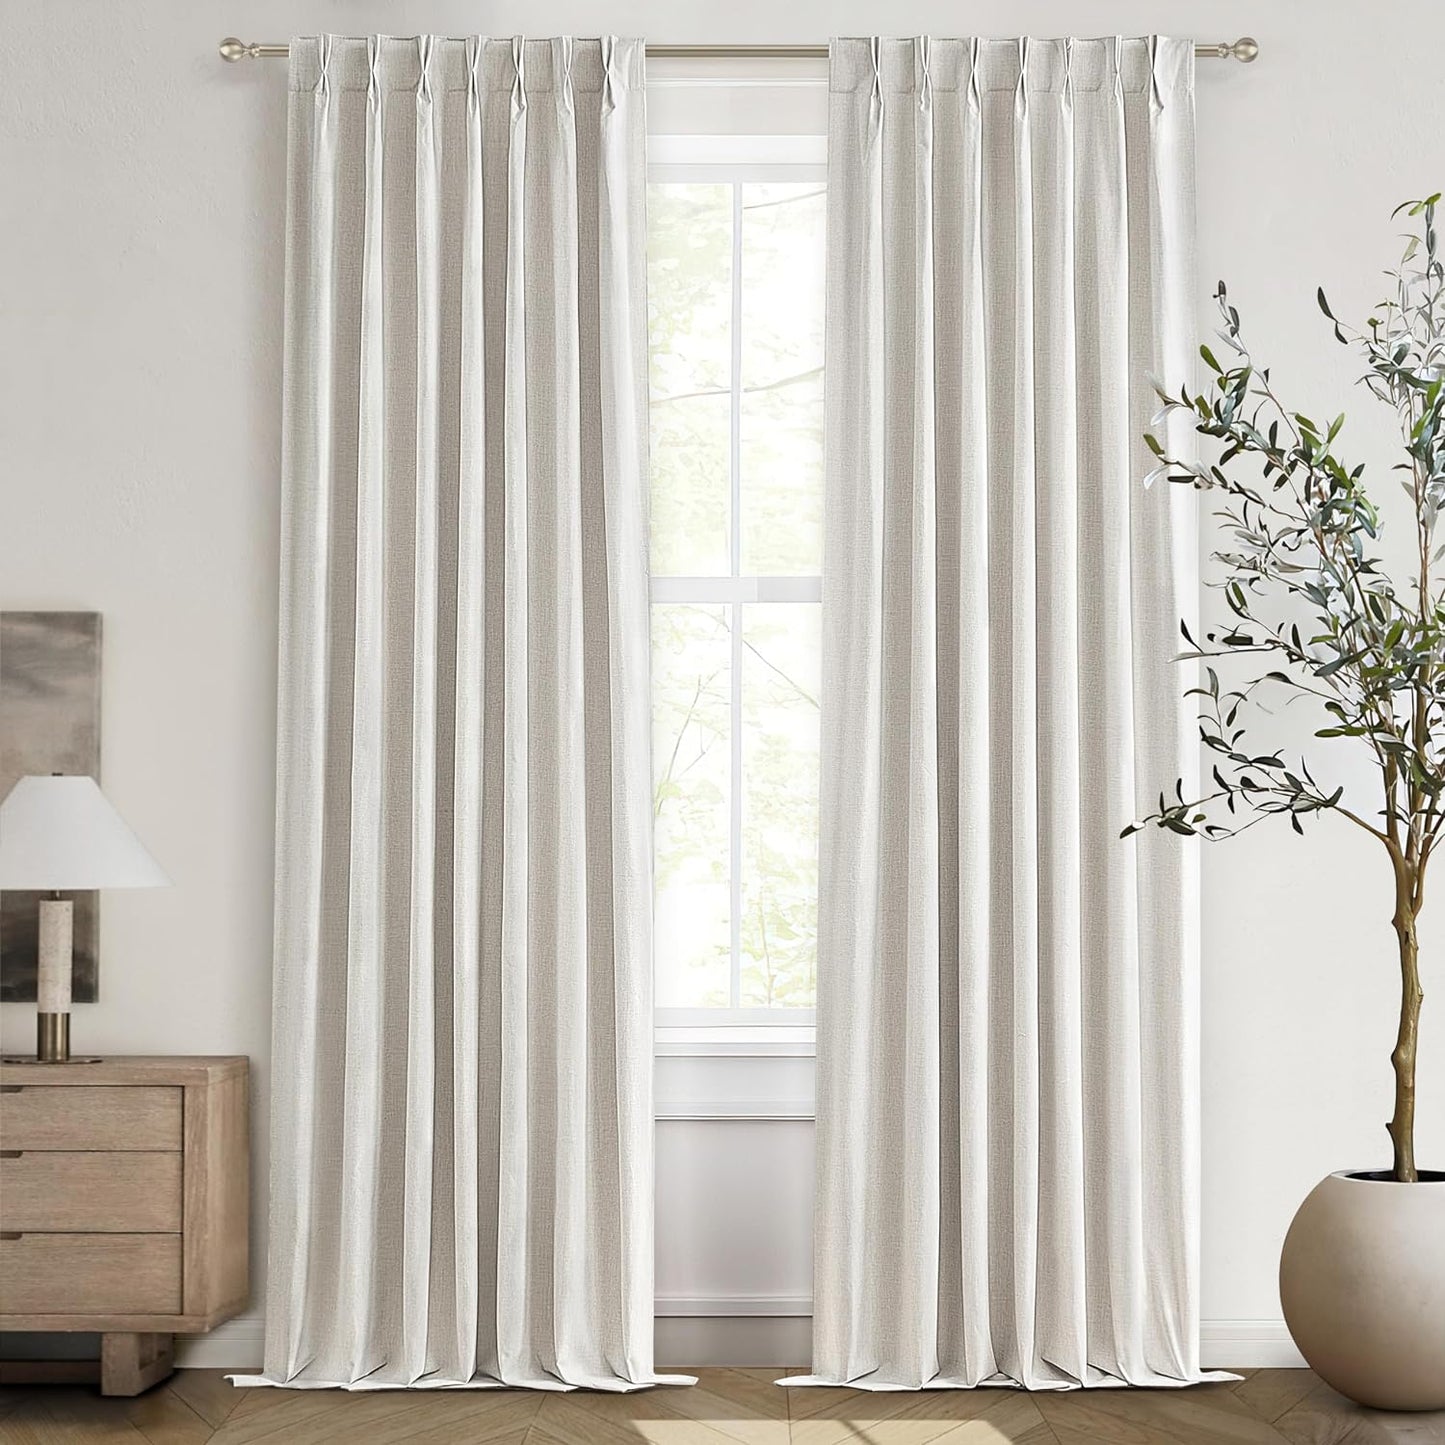 Natural Linen Pinch Pleated Blackout Curtains & Drapes 96 Inch Long Bedroom/Livingroom Farmhouse Curtains 2 Panel Sets, Neutral Track Room Darkening Thermal Insulated 8Ft Back Tab Window Curtain  QJmydeco Birch 40"W X 105"L X 2 Panels 